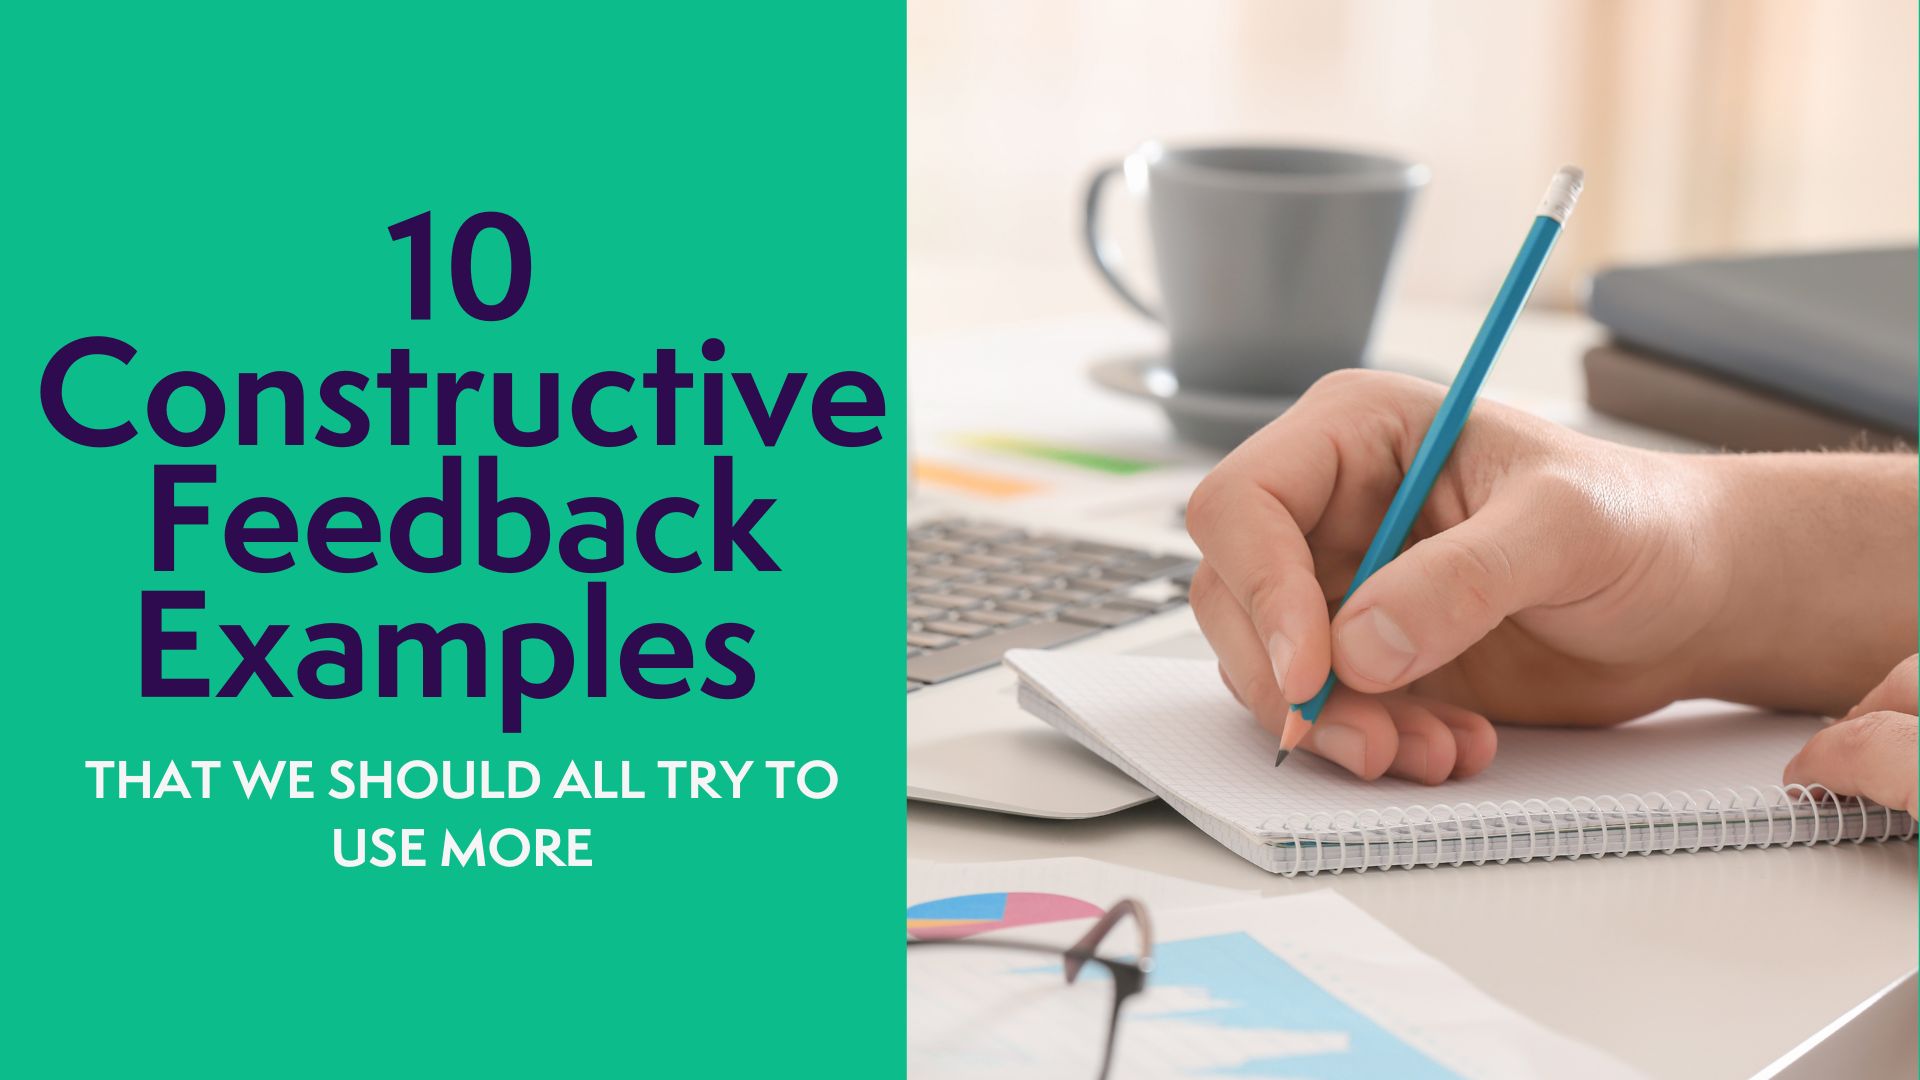 10 Constructive Feedback Examples That We Should All Try to Use More